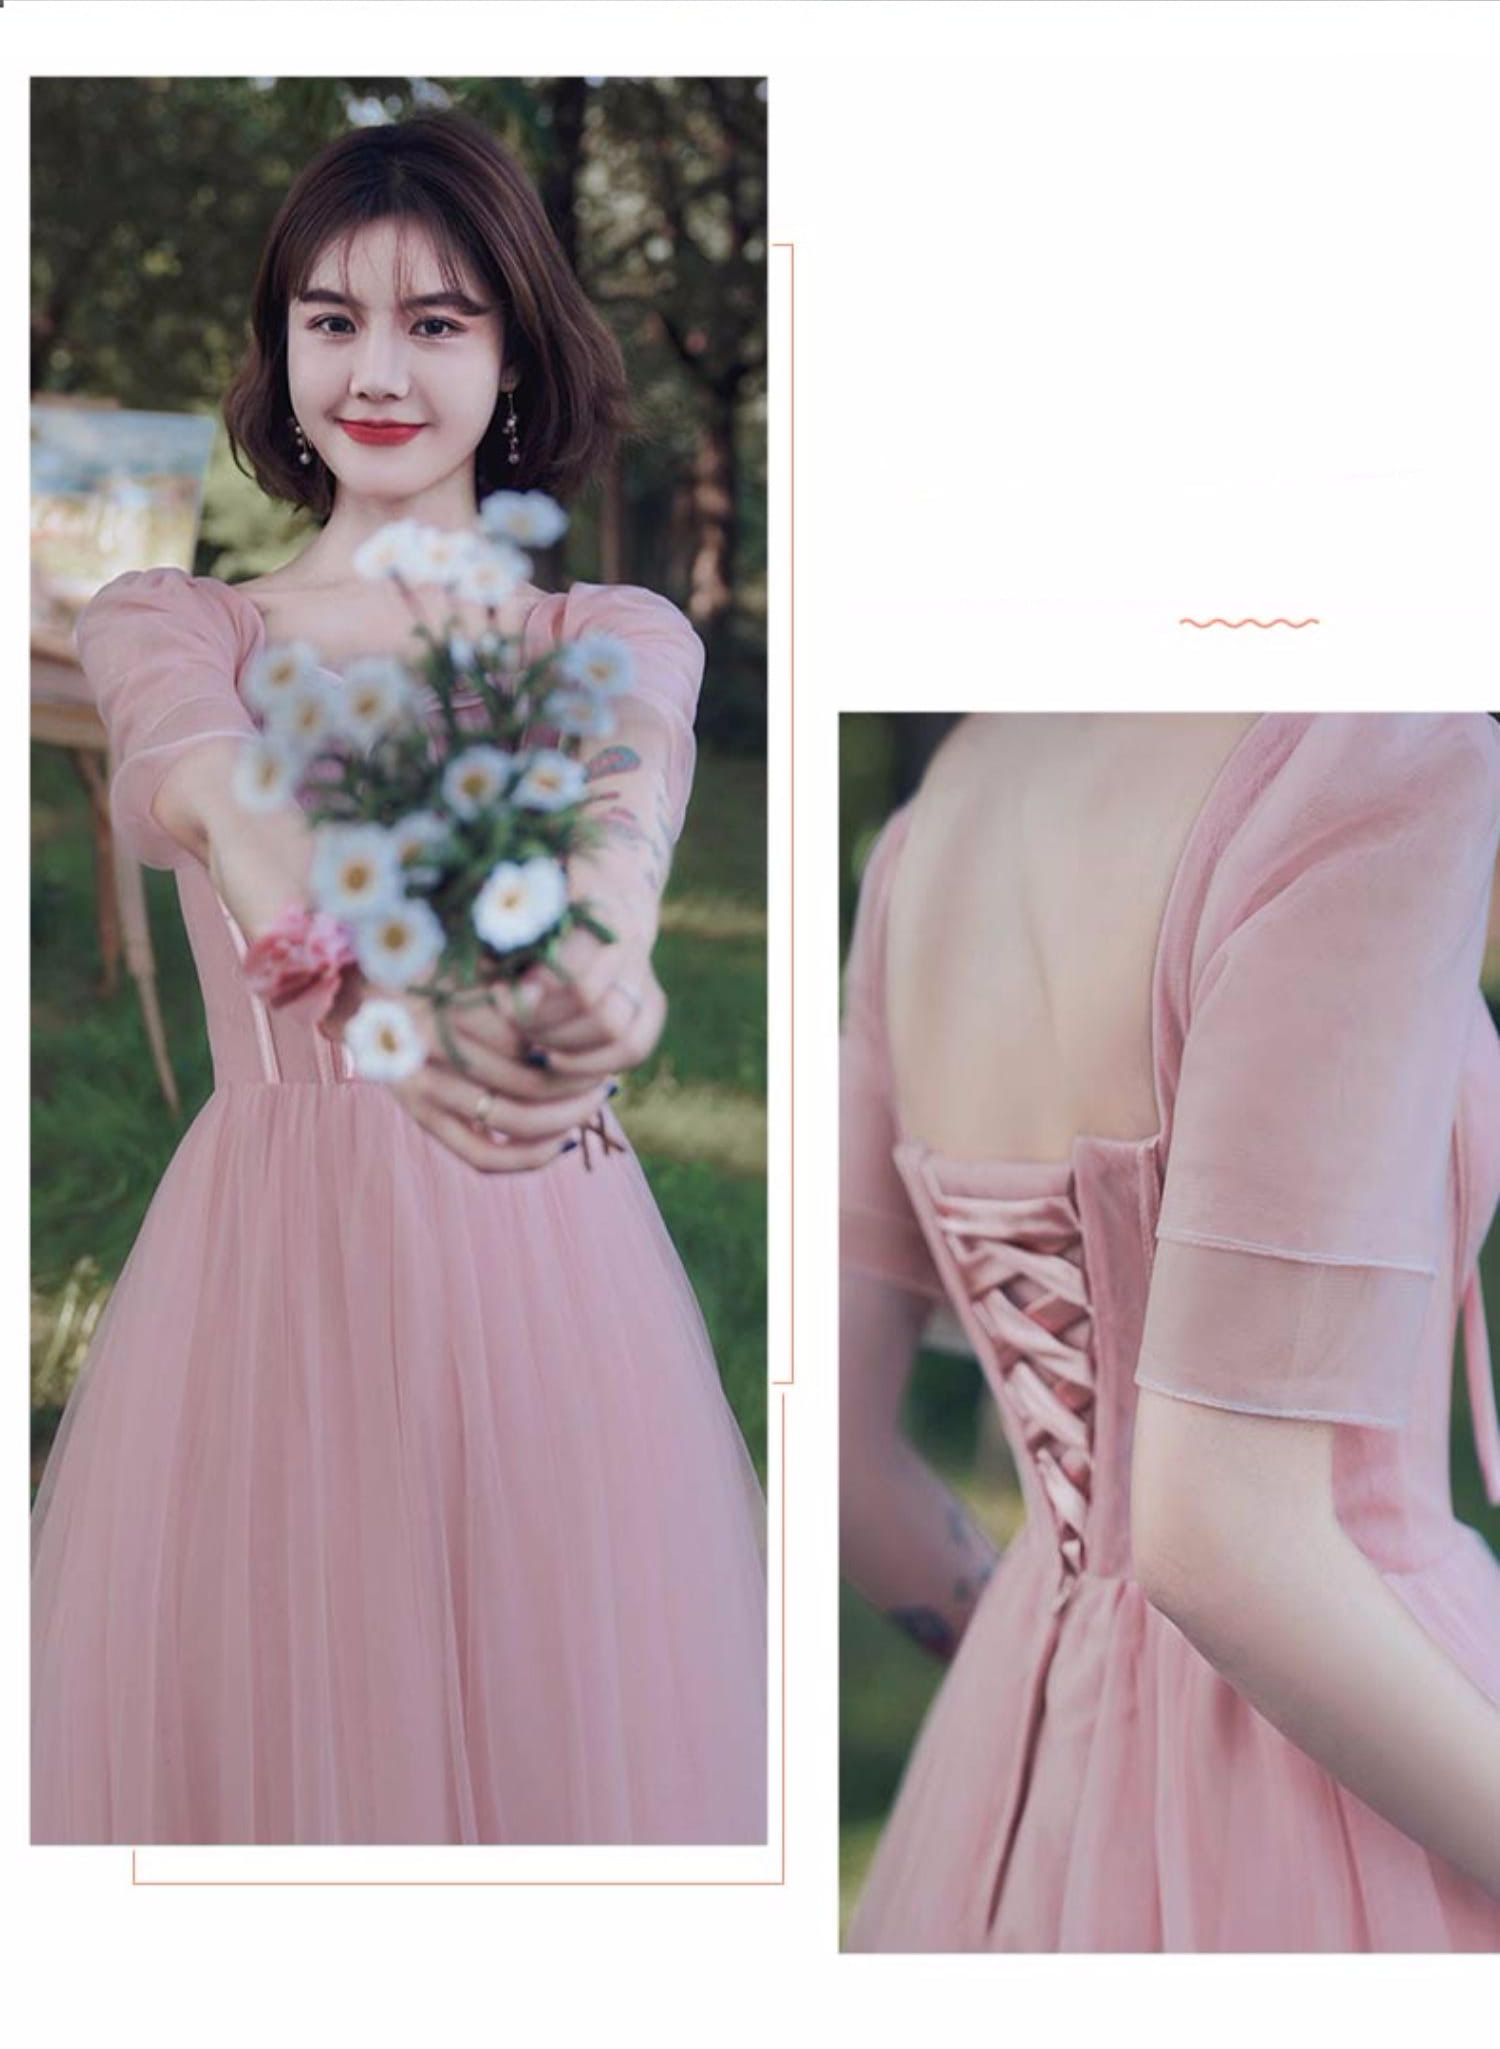 Feminine-Sweet-Pink-Tulle-Bridesmaid-Dress-Prom-Party-Ball-Gown12